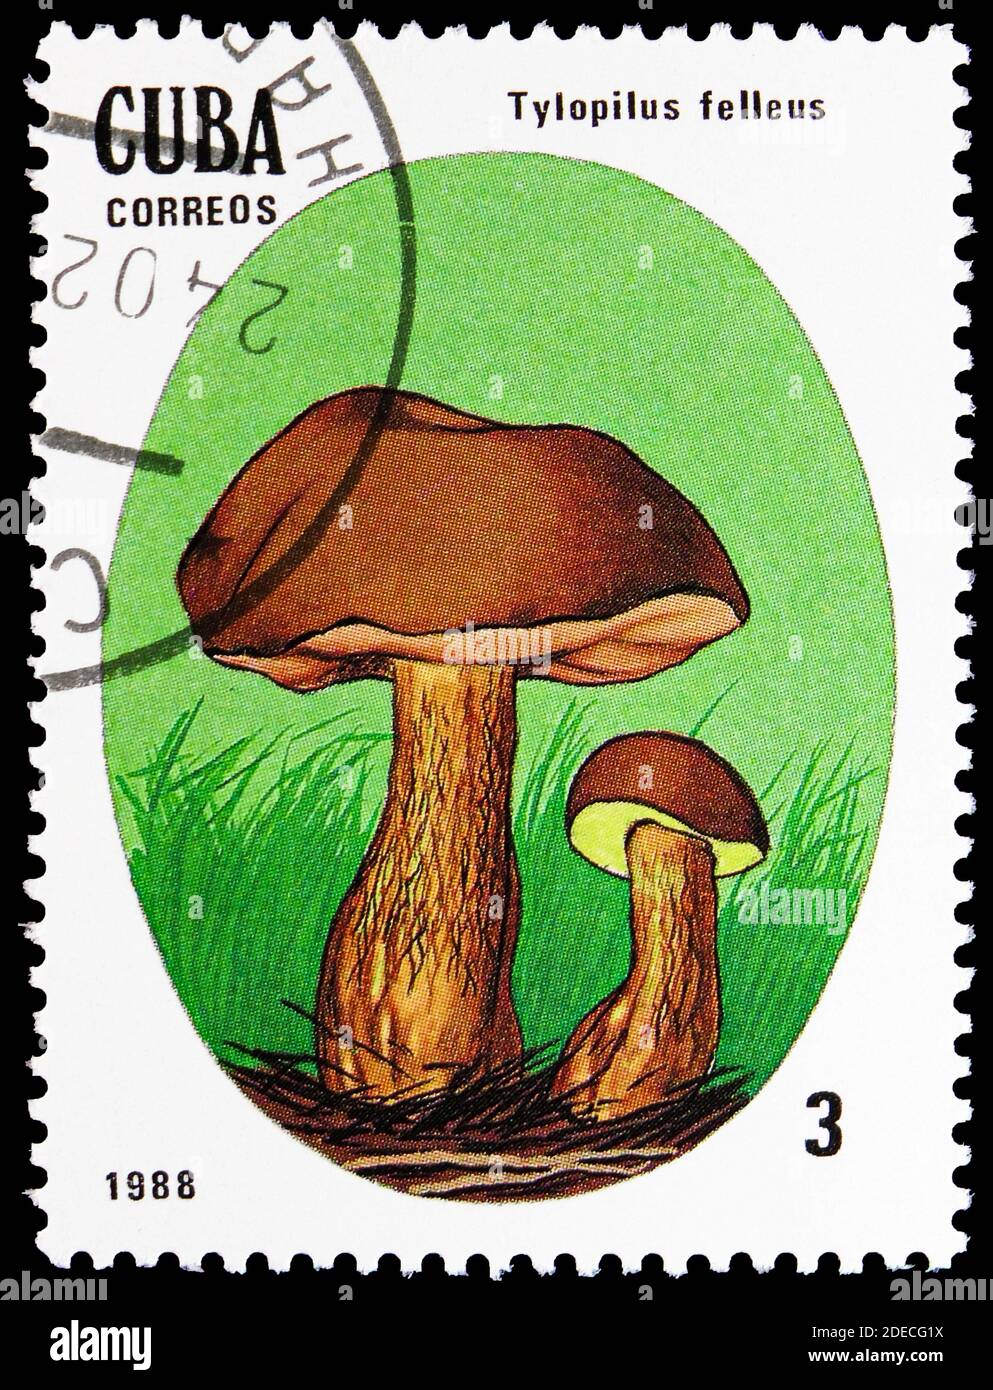 MOSCOW, RUSSIA - OCTOBER 17, 2020: Postage stamp printed in Cuba shows Tylopilus felleus, Mushrooms serie, circa 1988 Stock Photo